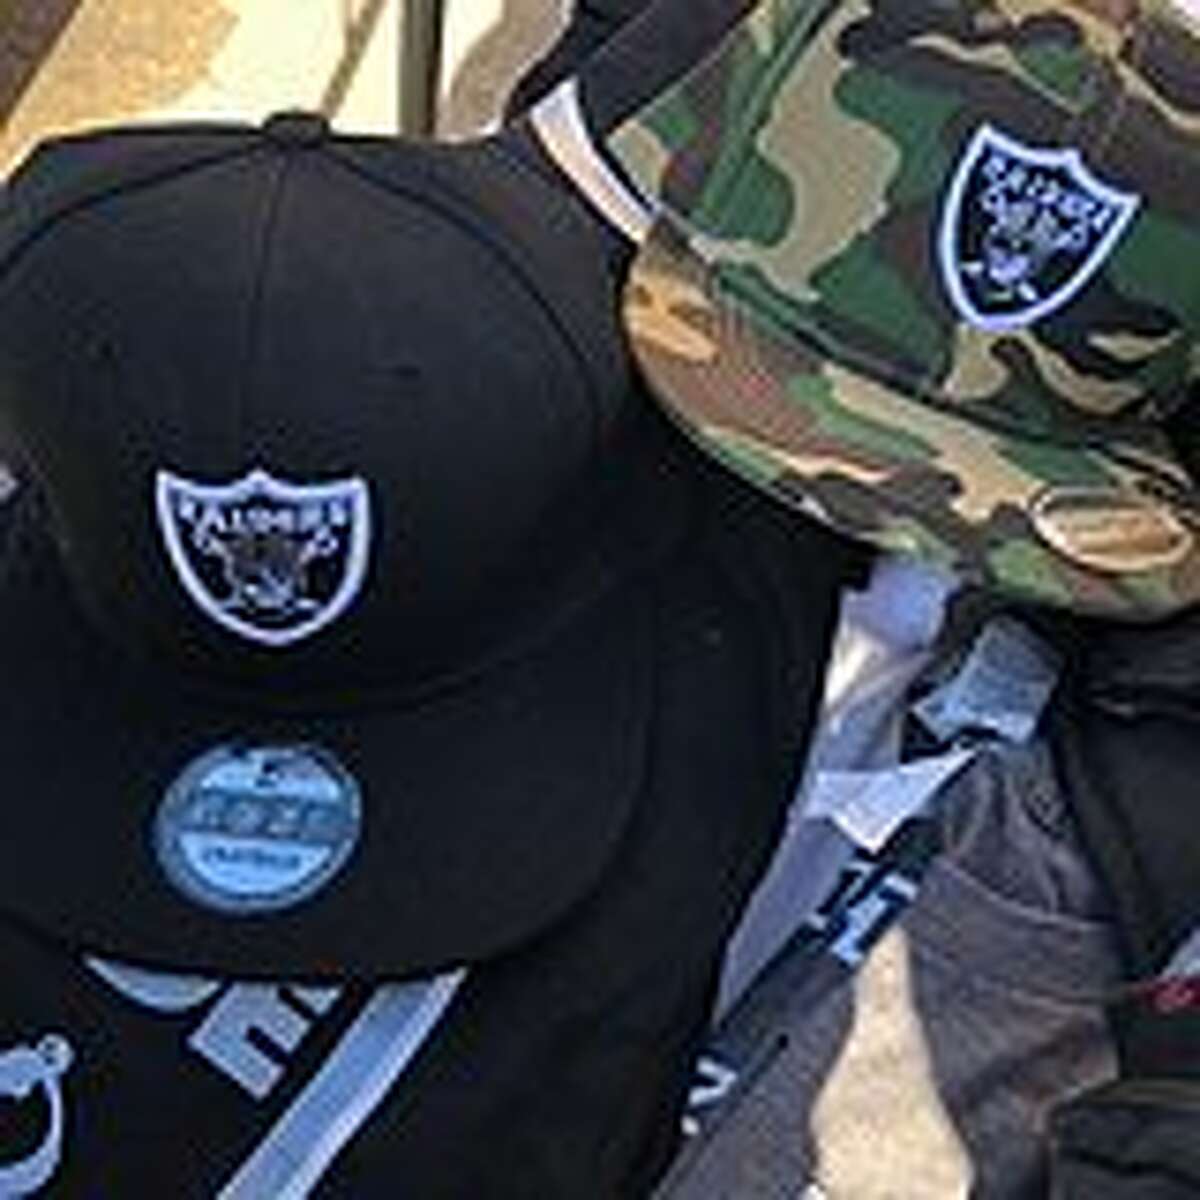 ICE agents raided Monday night's Raiders game and confiscated $11,000 in unauthorized NFL merchandise.